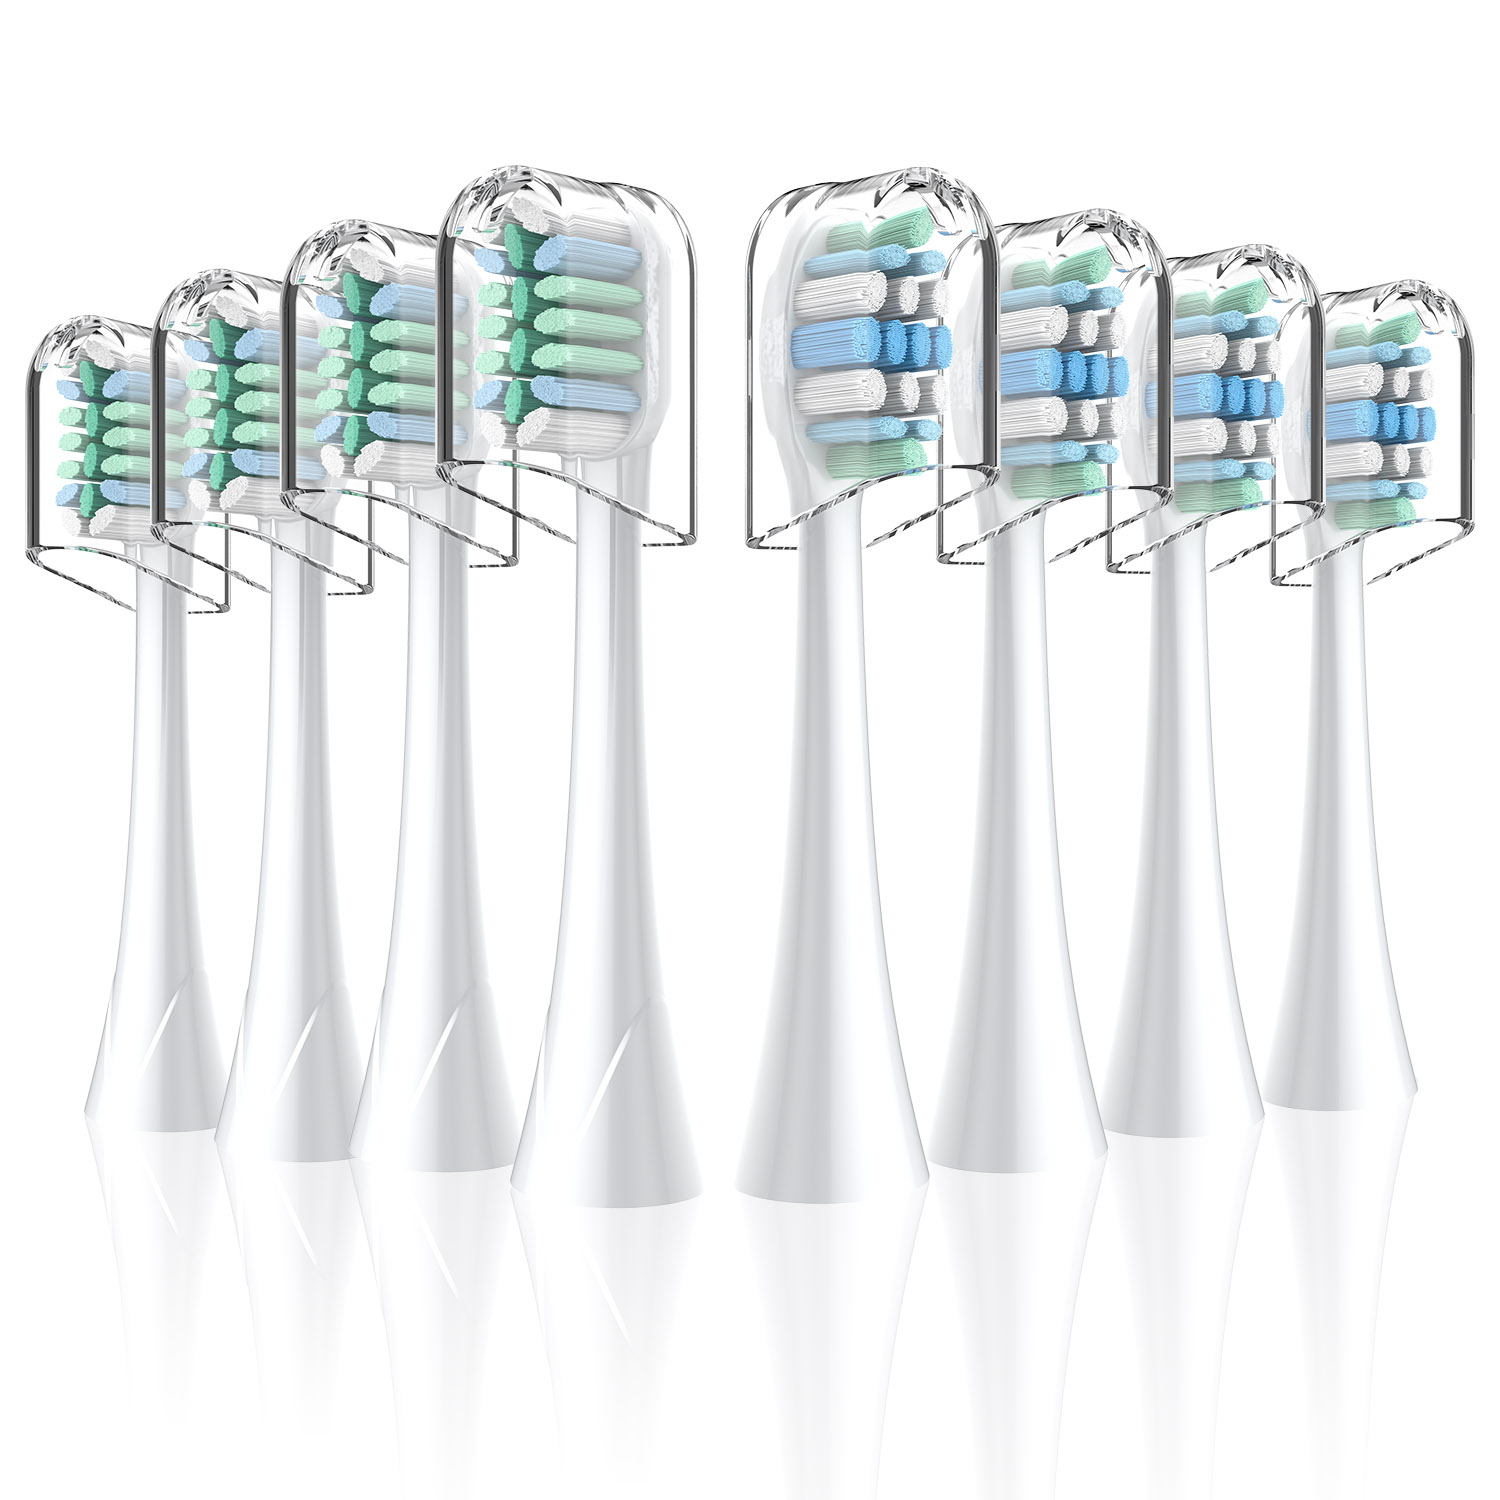 Tikola Phillips Electric Toothbrush Replacement Heads 8 Pack RRP £12.99 CLEARANCE XL £9.99